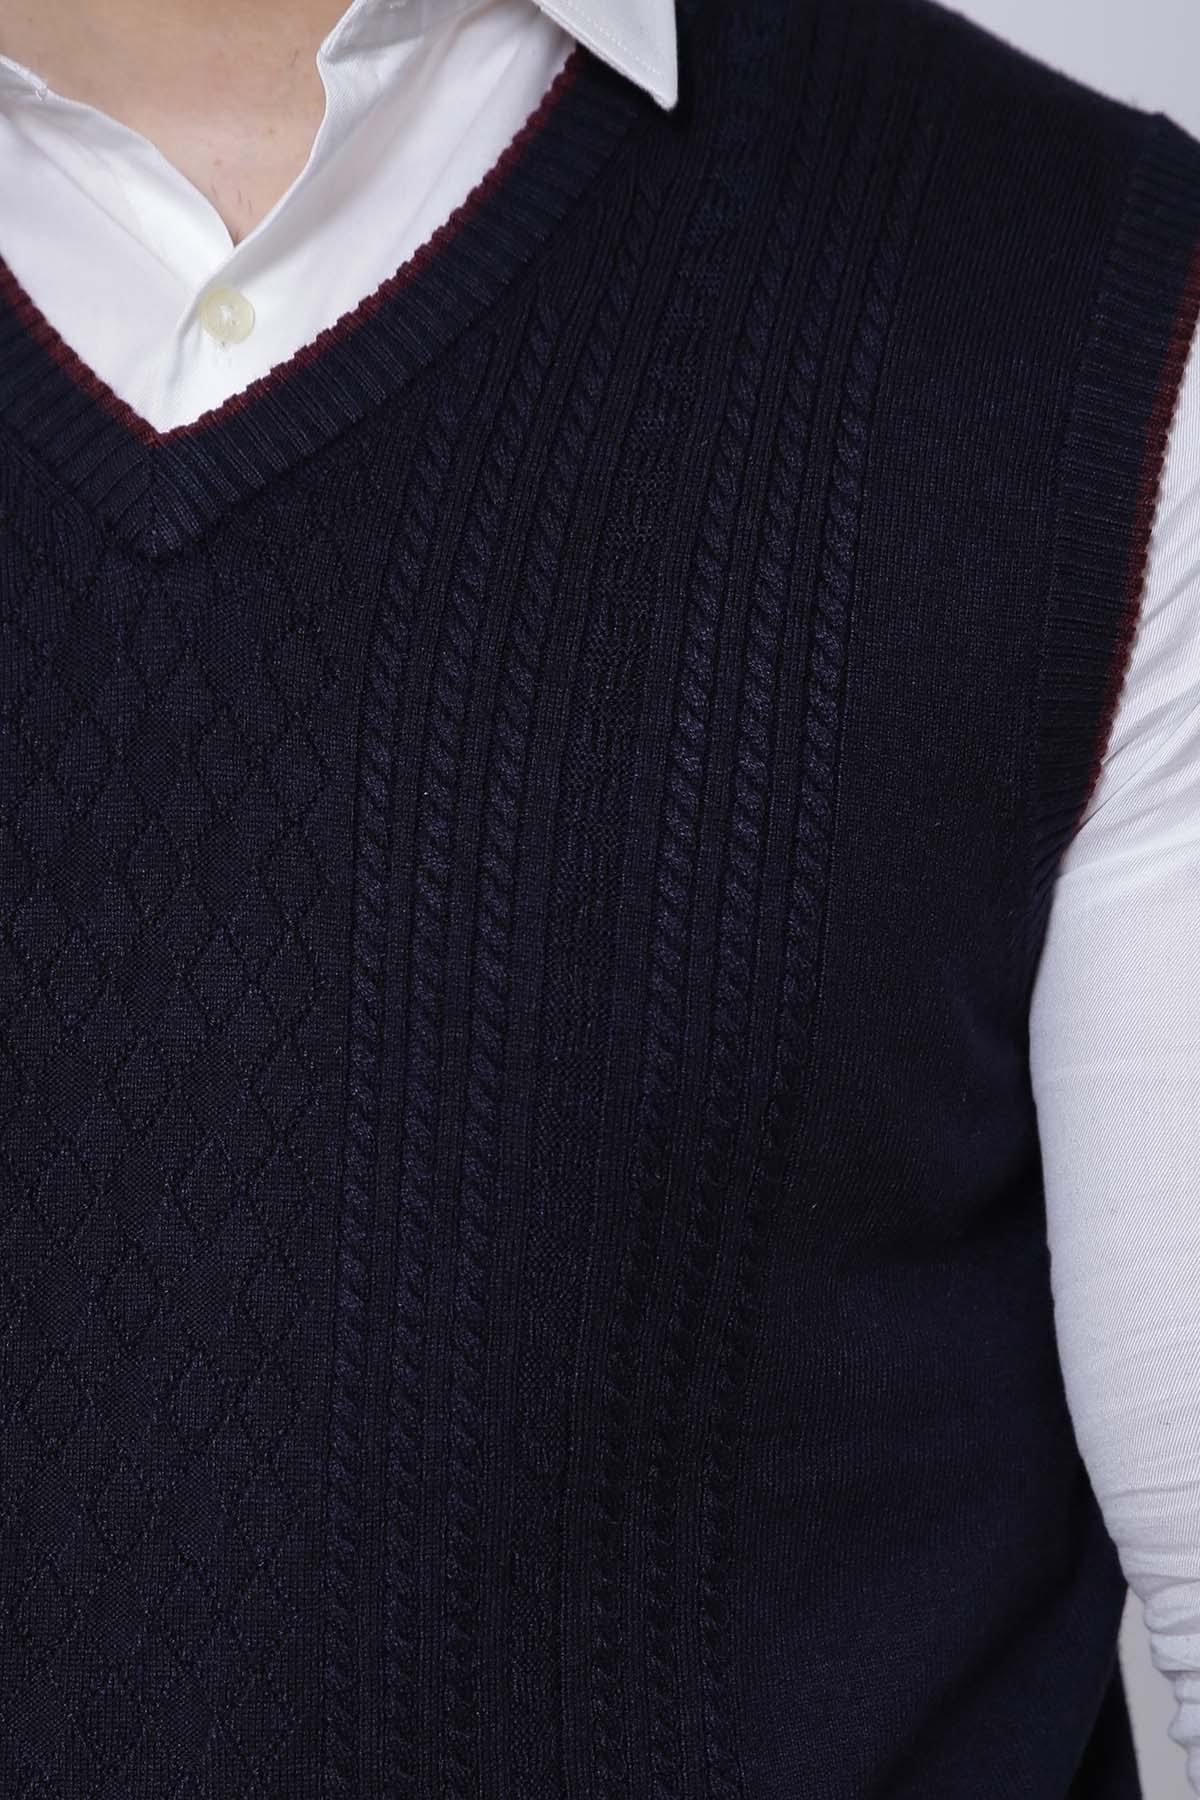 SWEATER V NECK SLEEVE LESS NAVY at Charcoal Clothing